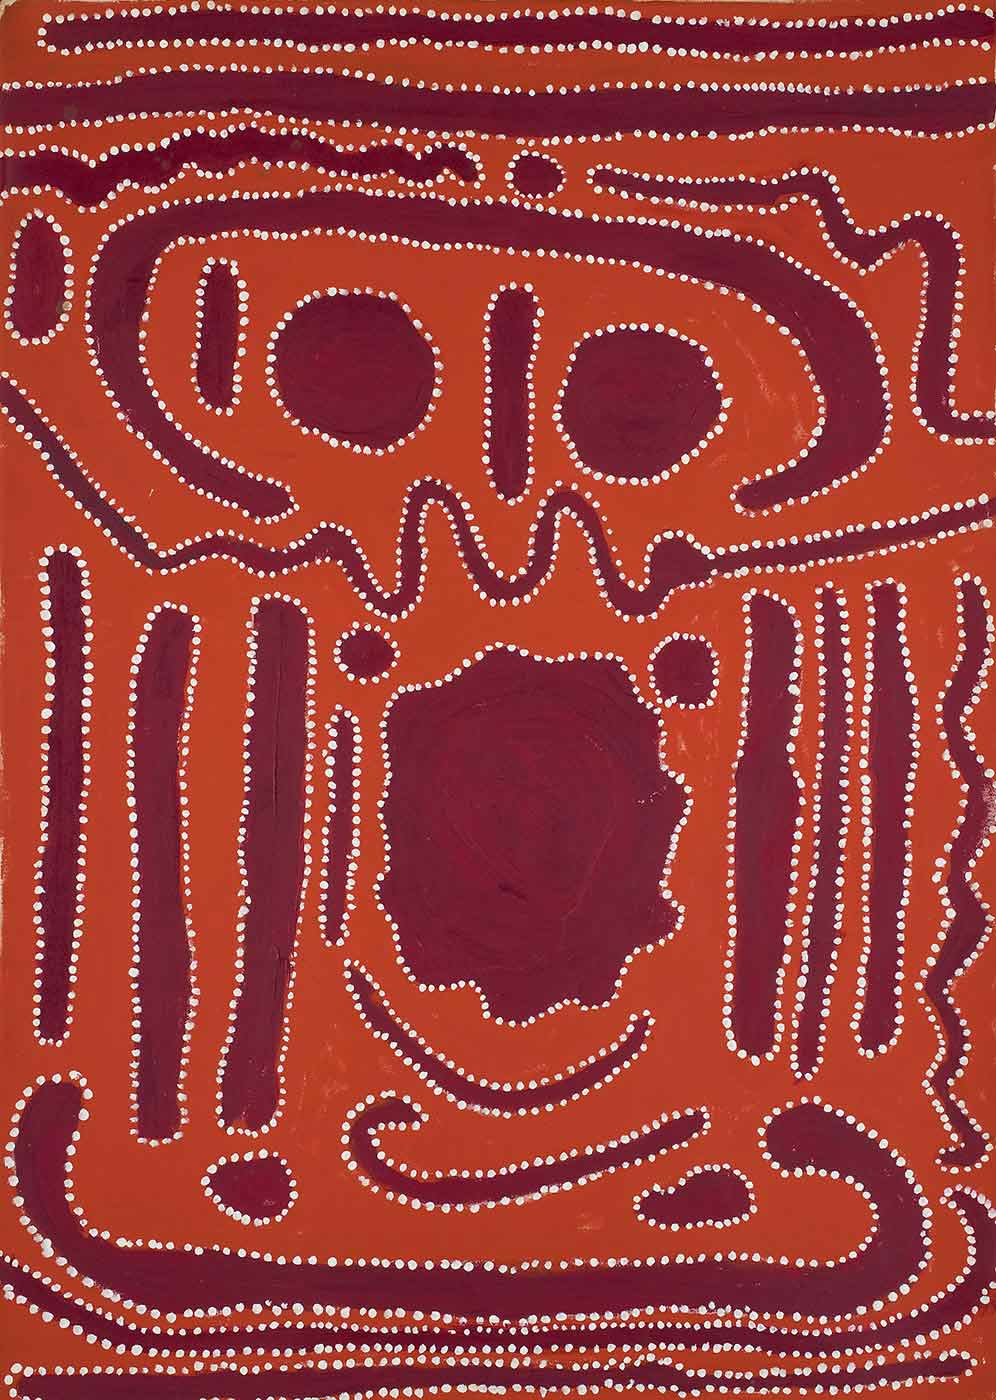 A red-orange toned painting on canvas with purple motifs outlined in white dots. There is a central wavy edged oval with a C shape above and below it. Inside the upper C shape are two circles and two stick like shapes, and above it there are two long horizontal lines and two wavy lines. There is a wavy and straight line between the upper C and the wavy oval, while next to the top of the wavy oval there are two small circles. The wavy oval has four vertical lines on both sides, one of which is wavy and one that is much shorter that the others. Between the wavy oval and the lower C shape there are two curved lines and two uneven oval shapes. Underneath the lower C are two uneven shaped horizontal lines. - click to view larger image